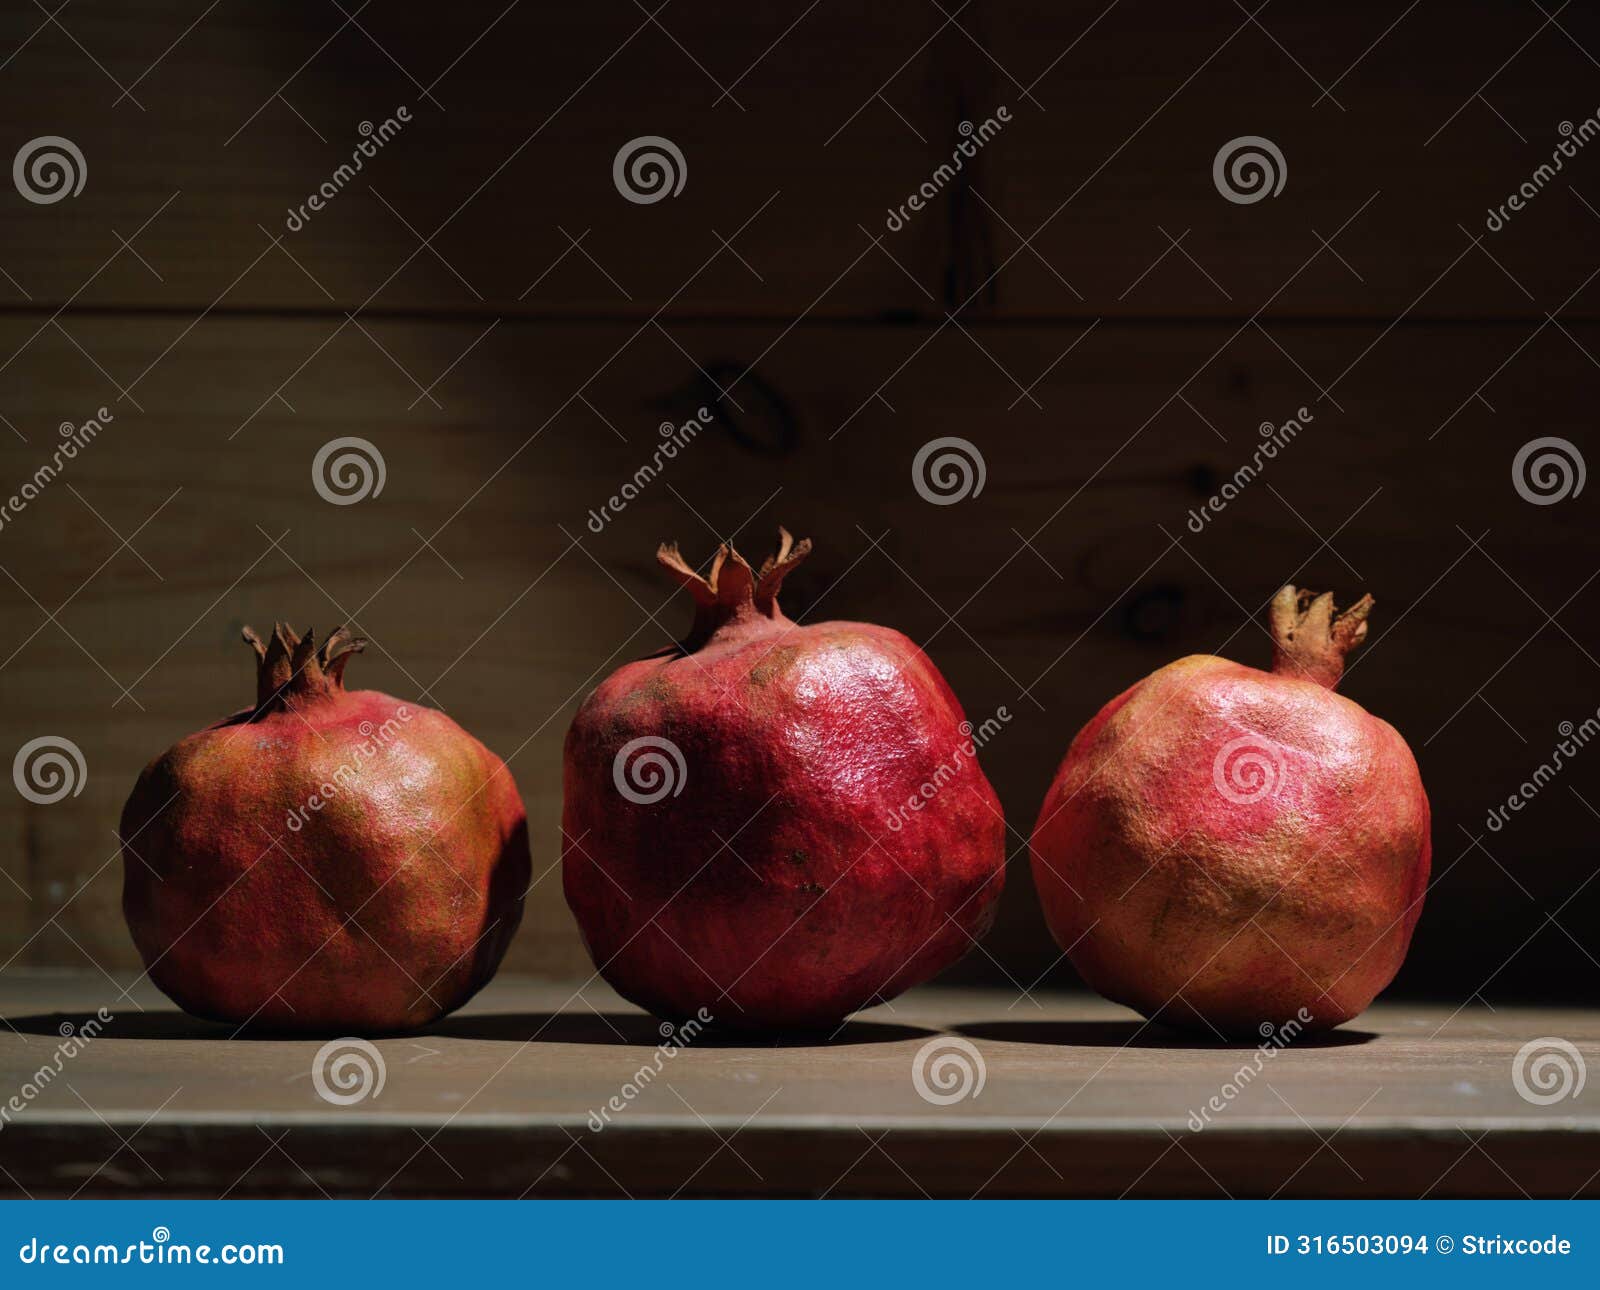 red organic grown pomegranates in bright sunlight with copyspace. natural fruit concept image